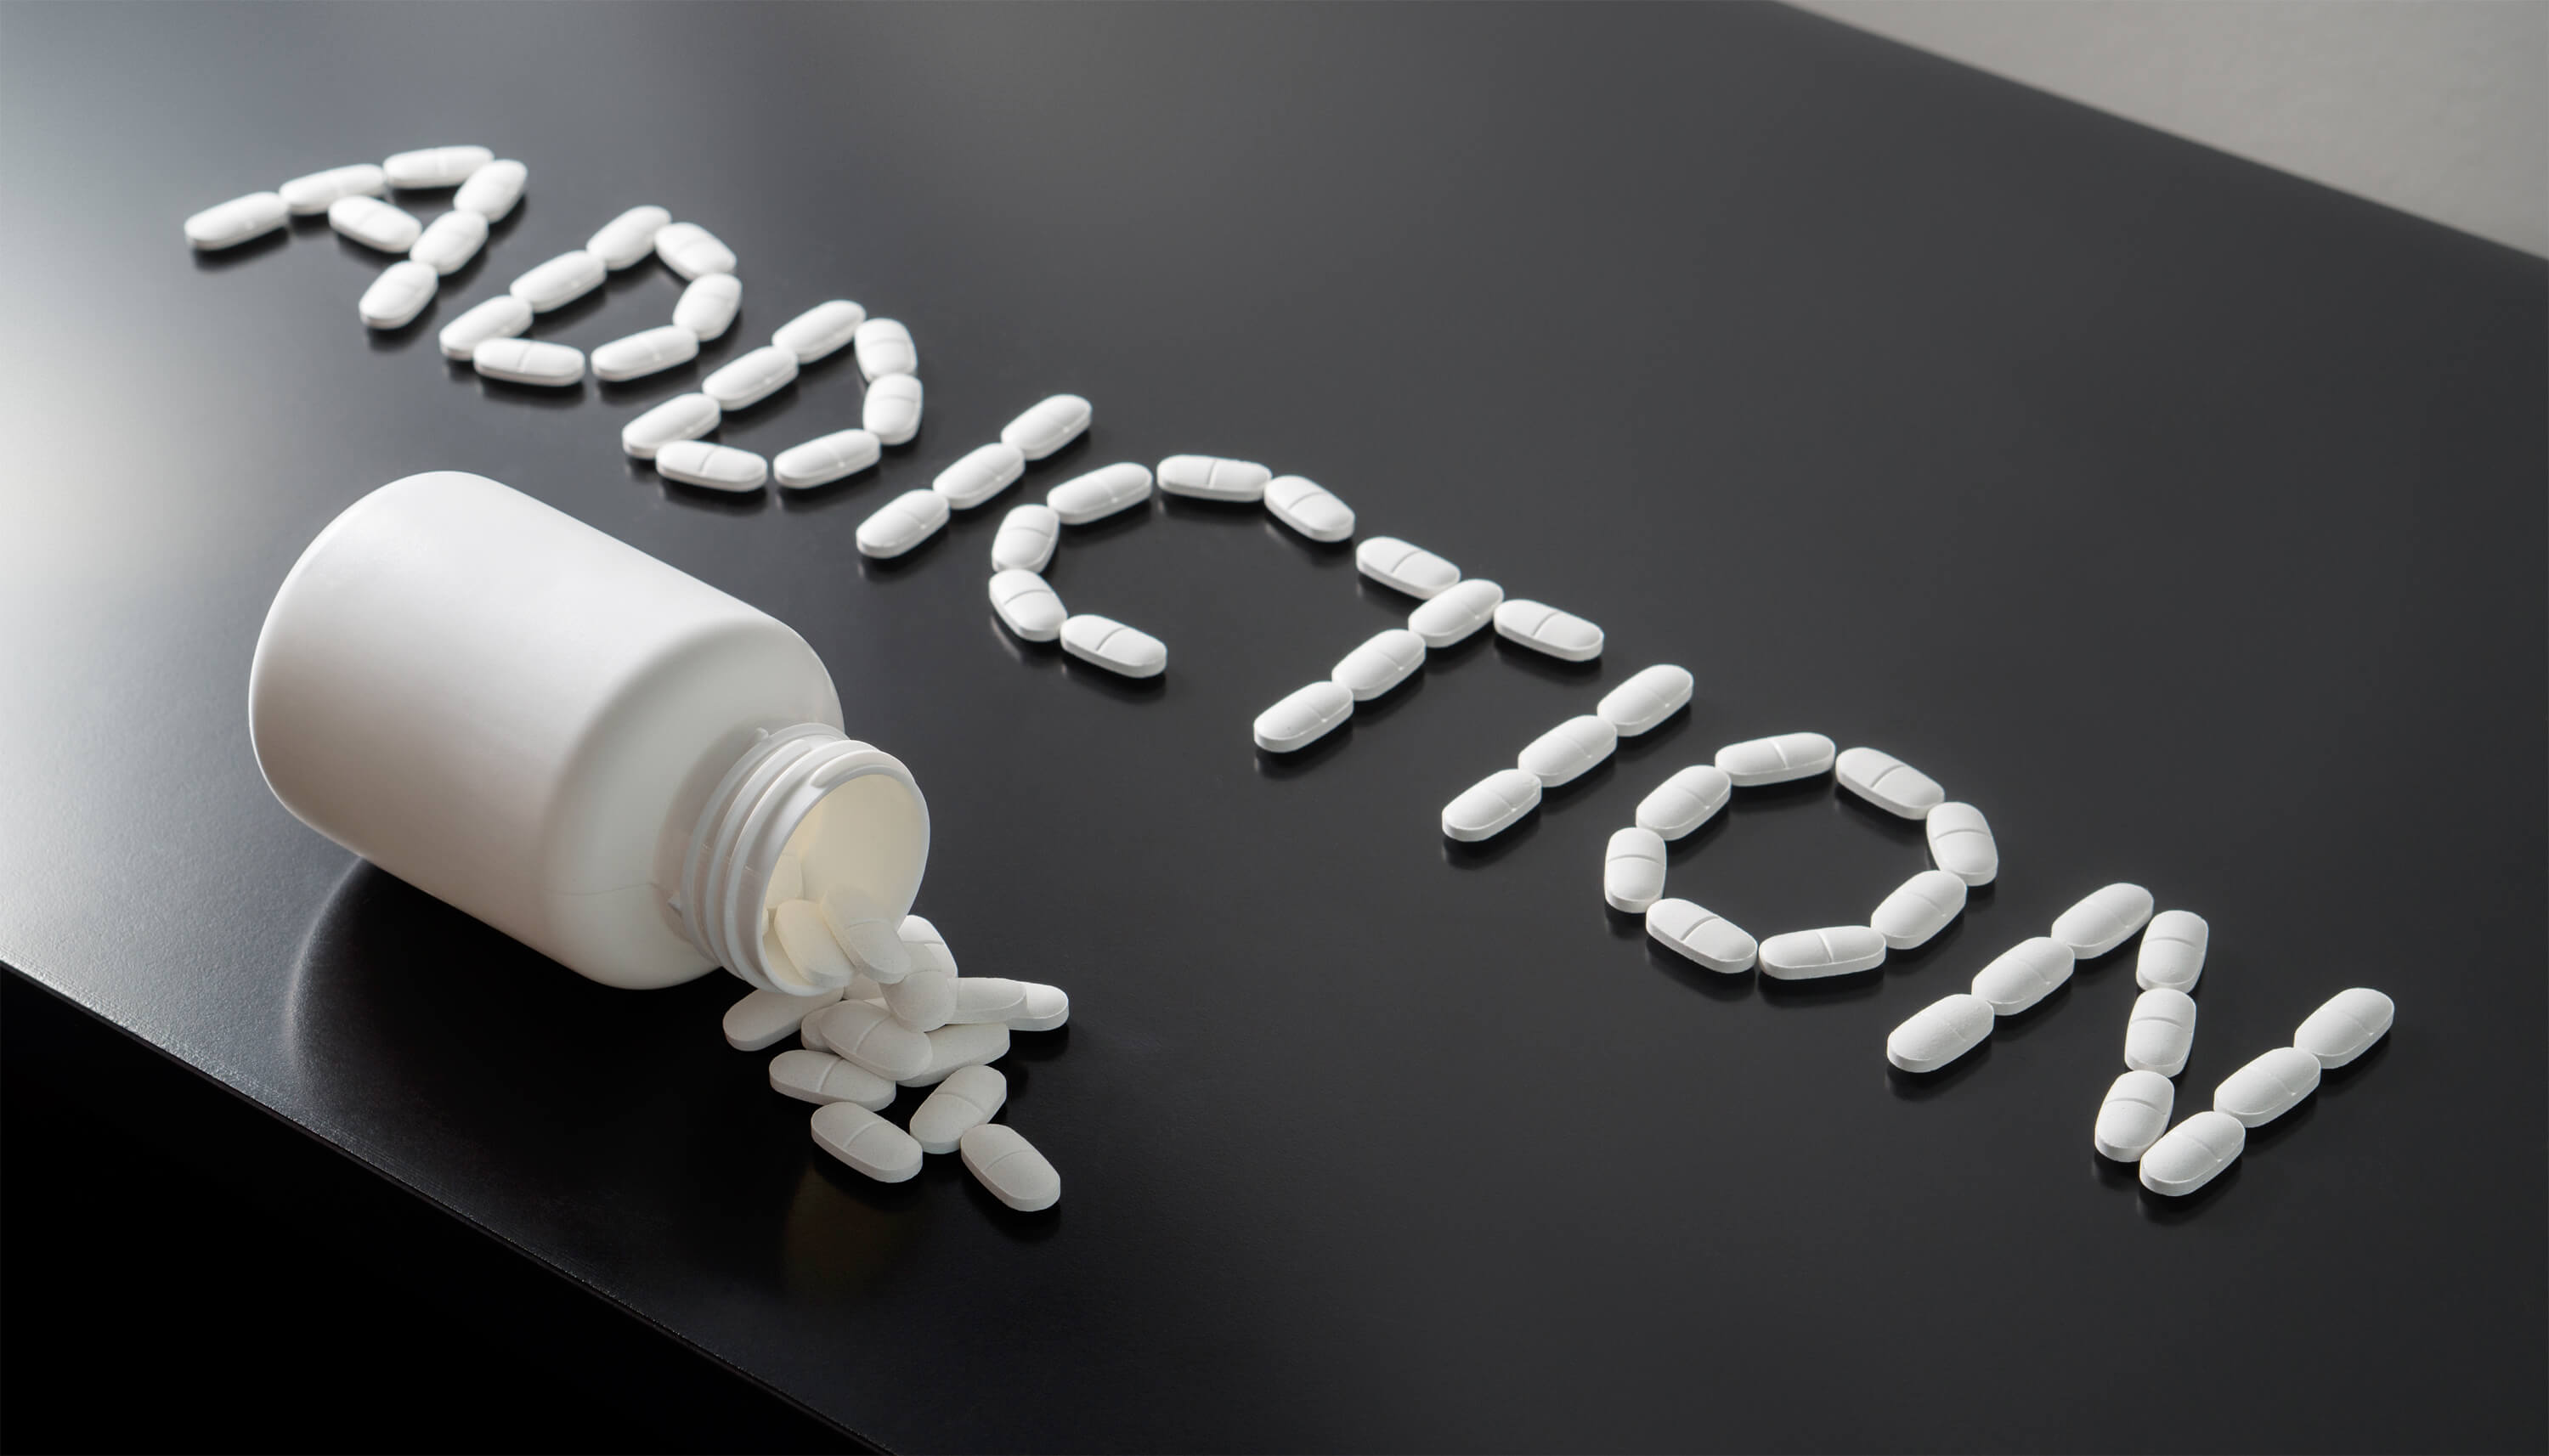 the word "addiction" spelled with prescription pills on black tabletop